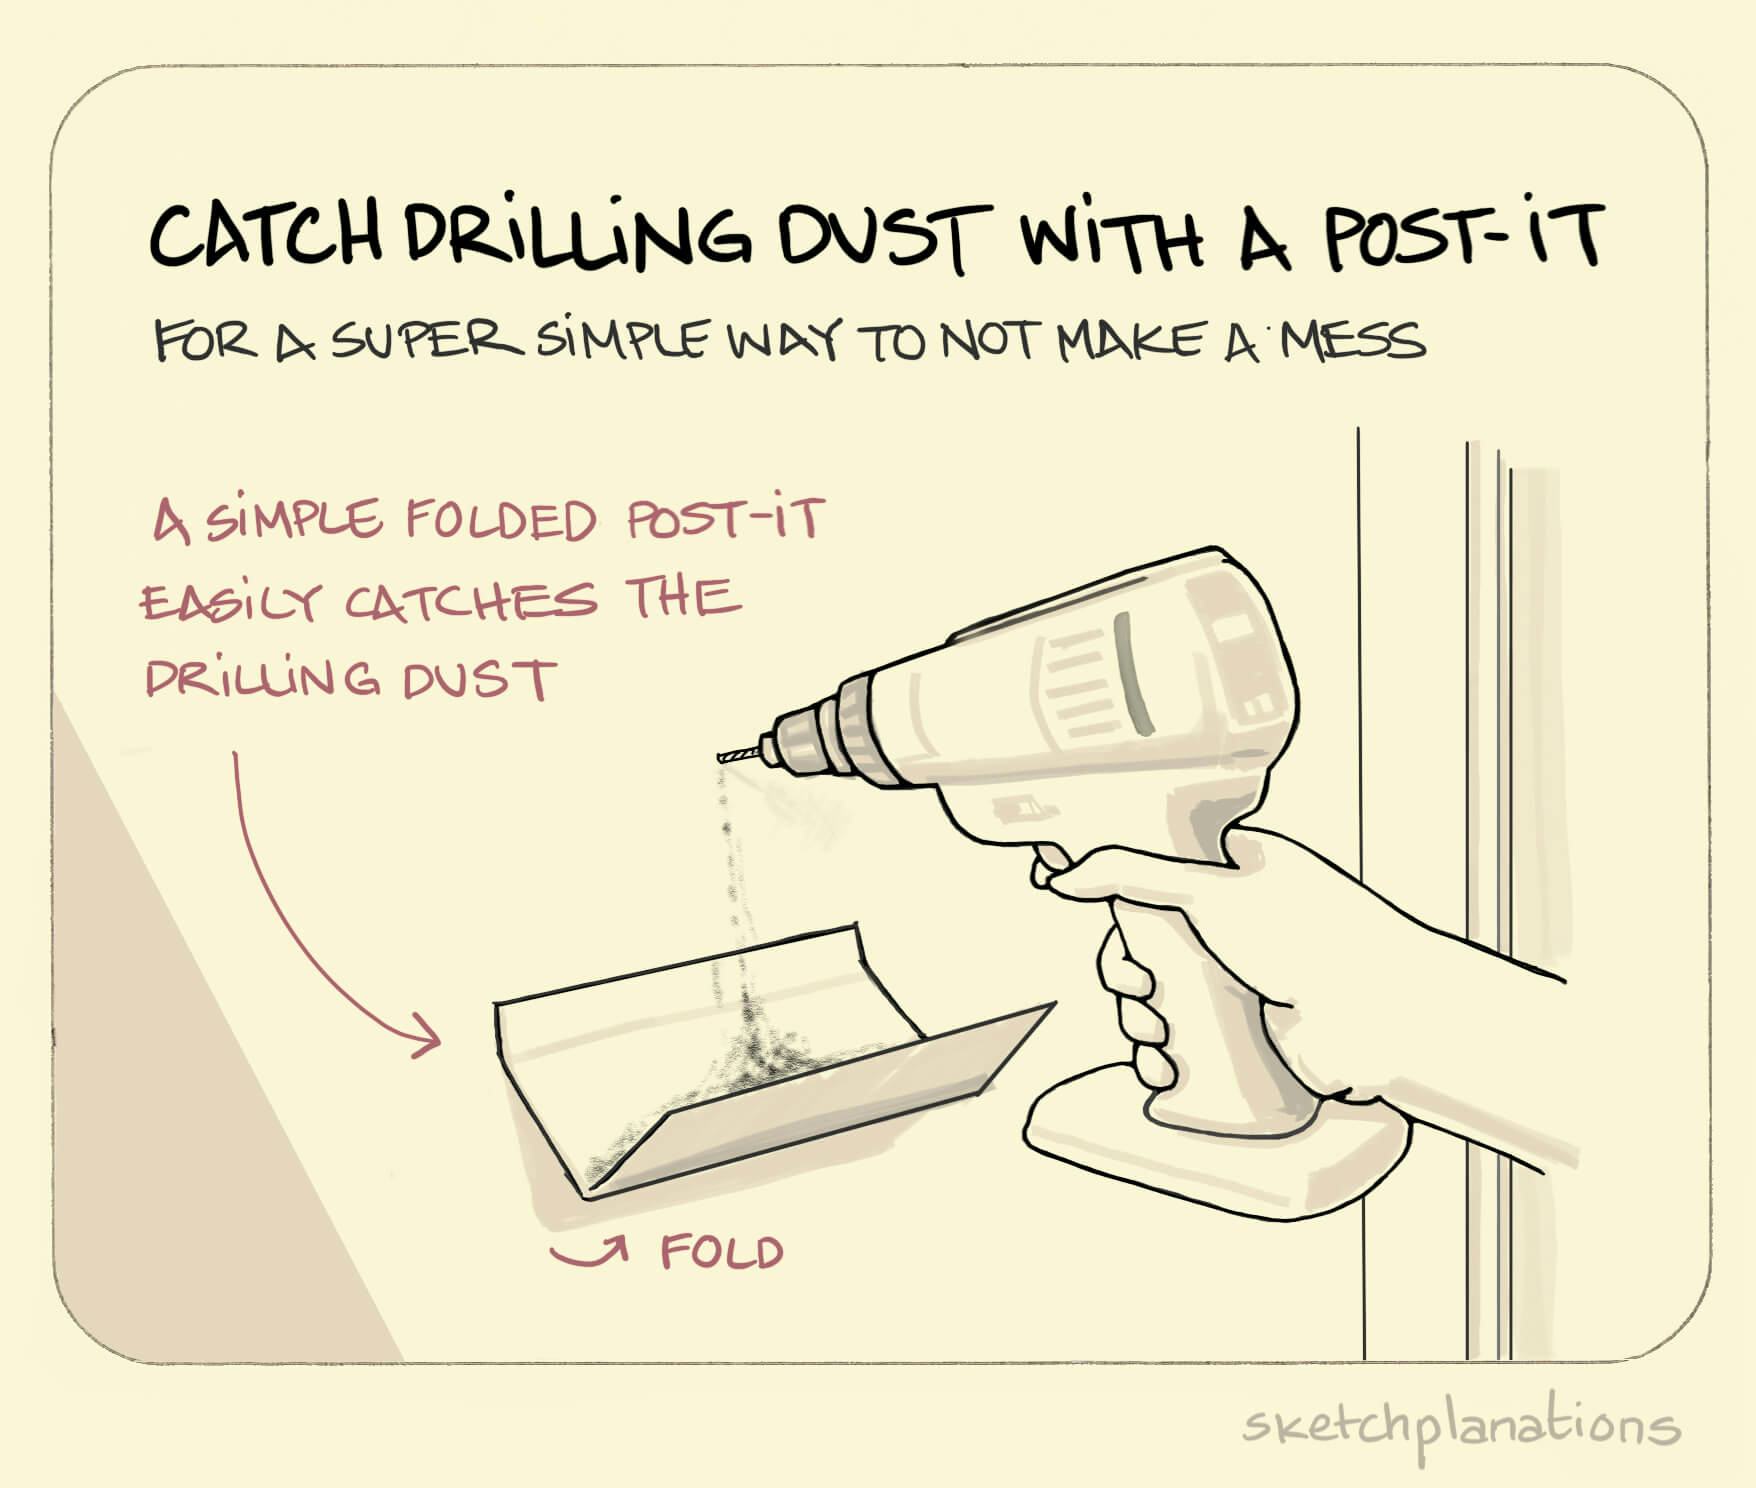 Catch drilling dust with a Post it - Sketchplanations